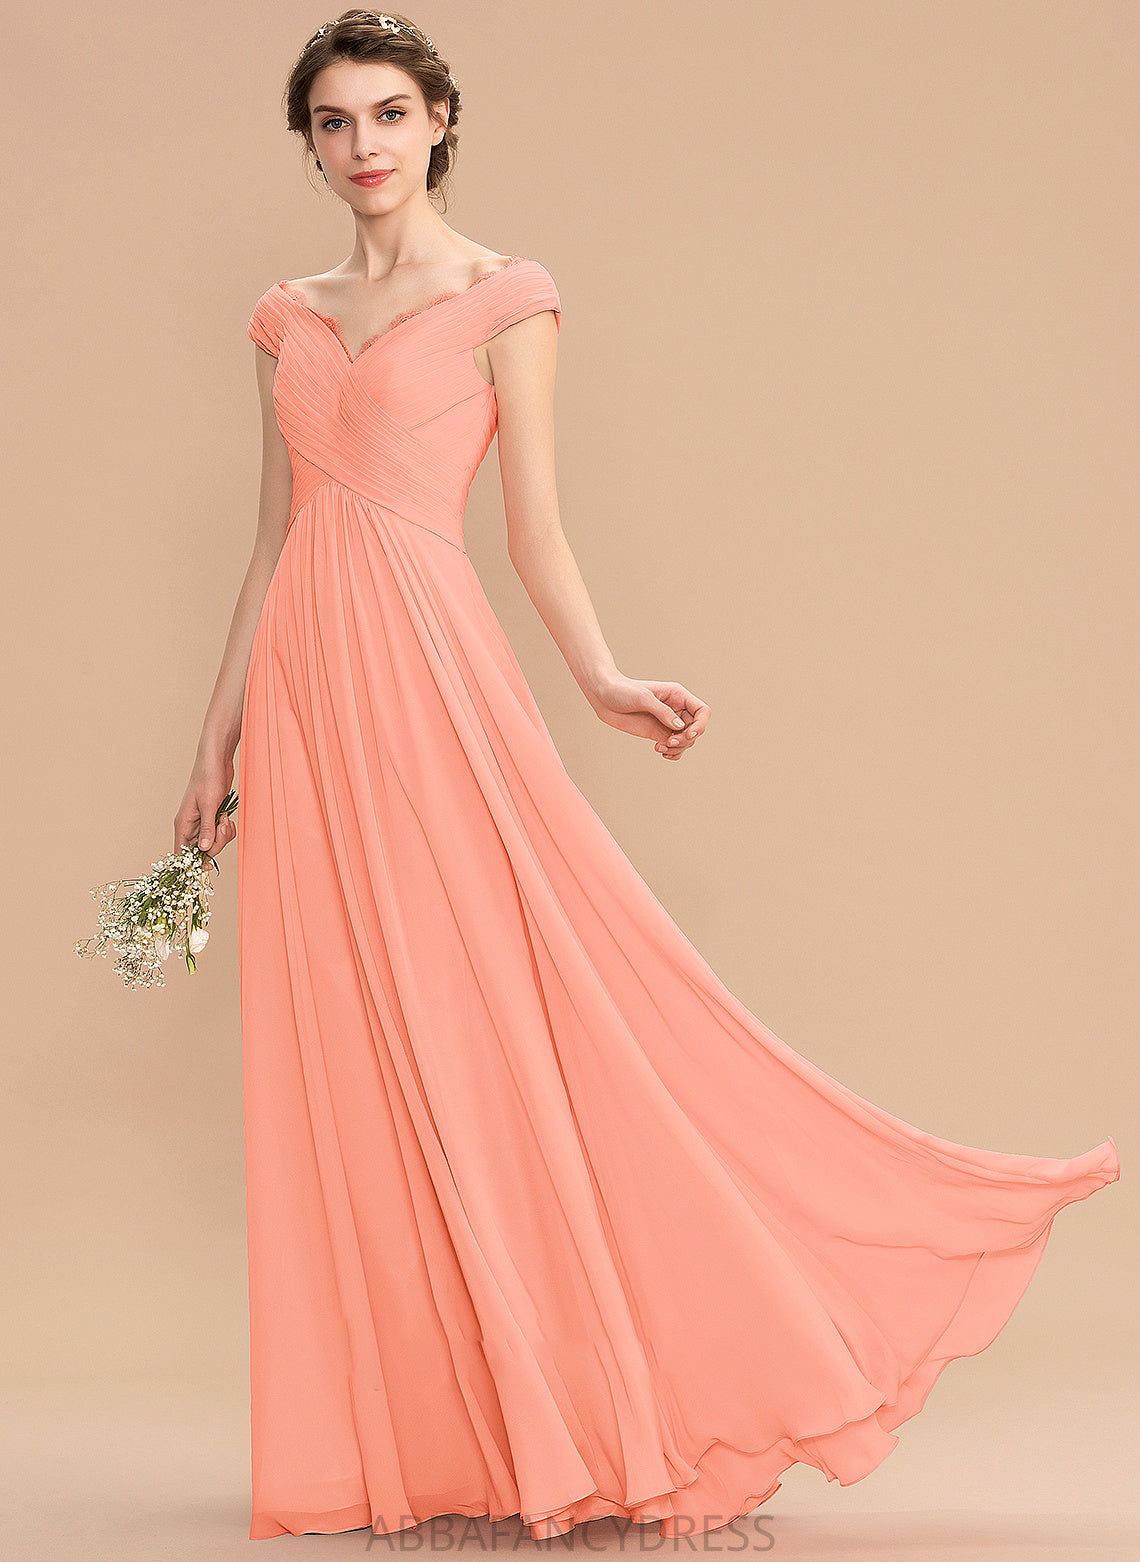 Silhouette Lace Ruffle Length A-Line Neckline Fabric Off-the-Shoulder Embellishment Floor-Length Molly Natural Waist